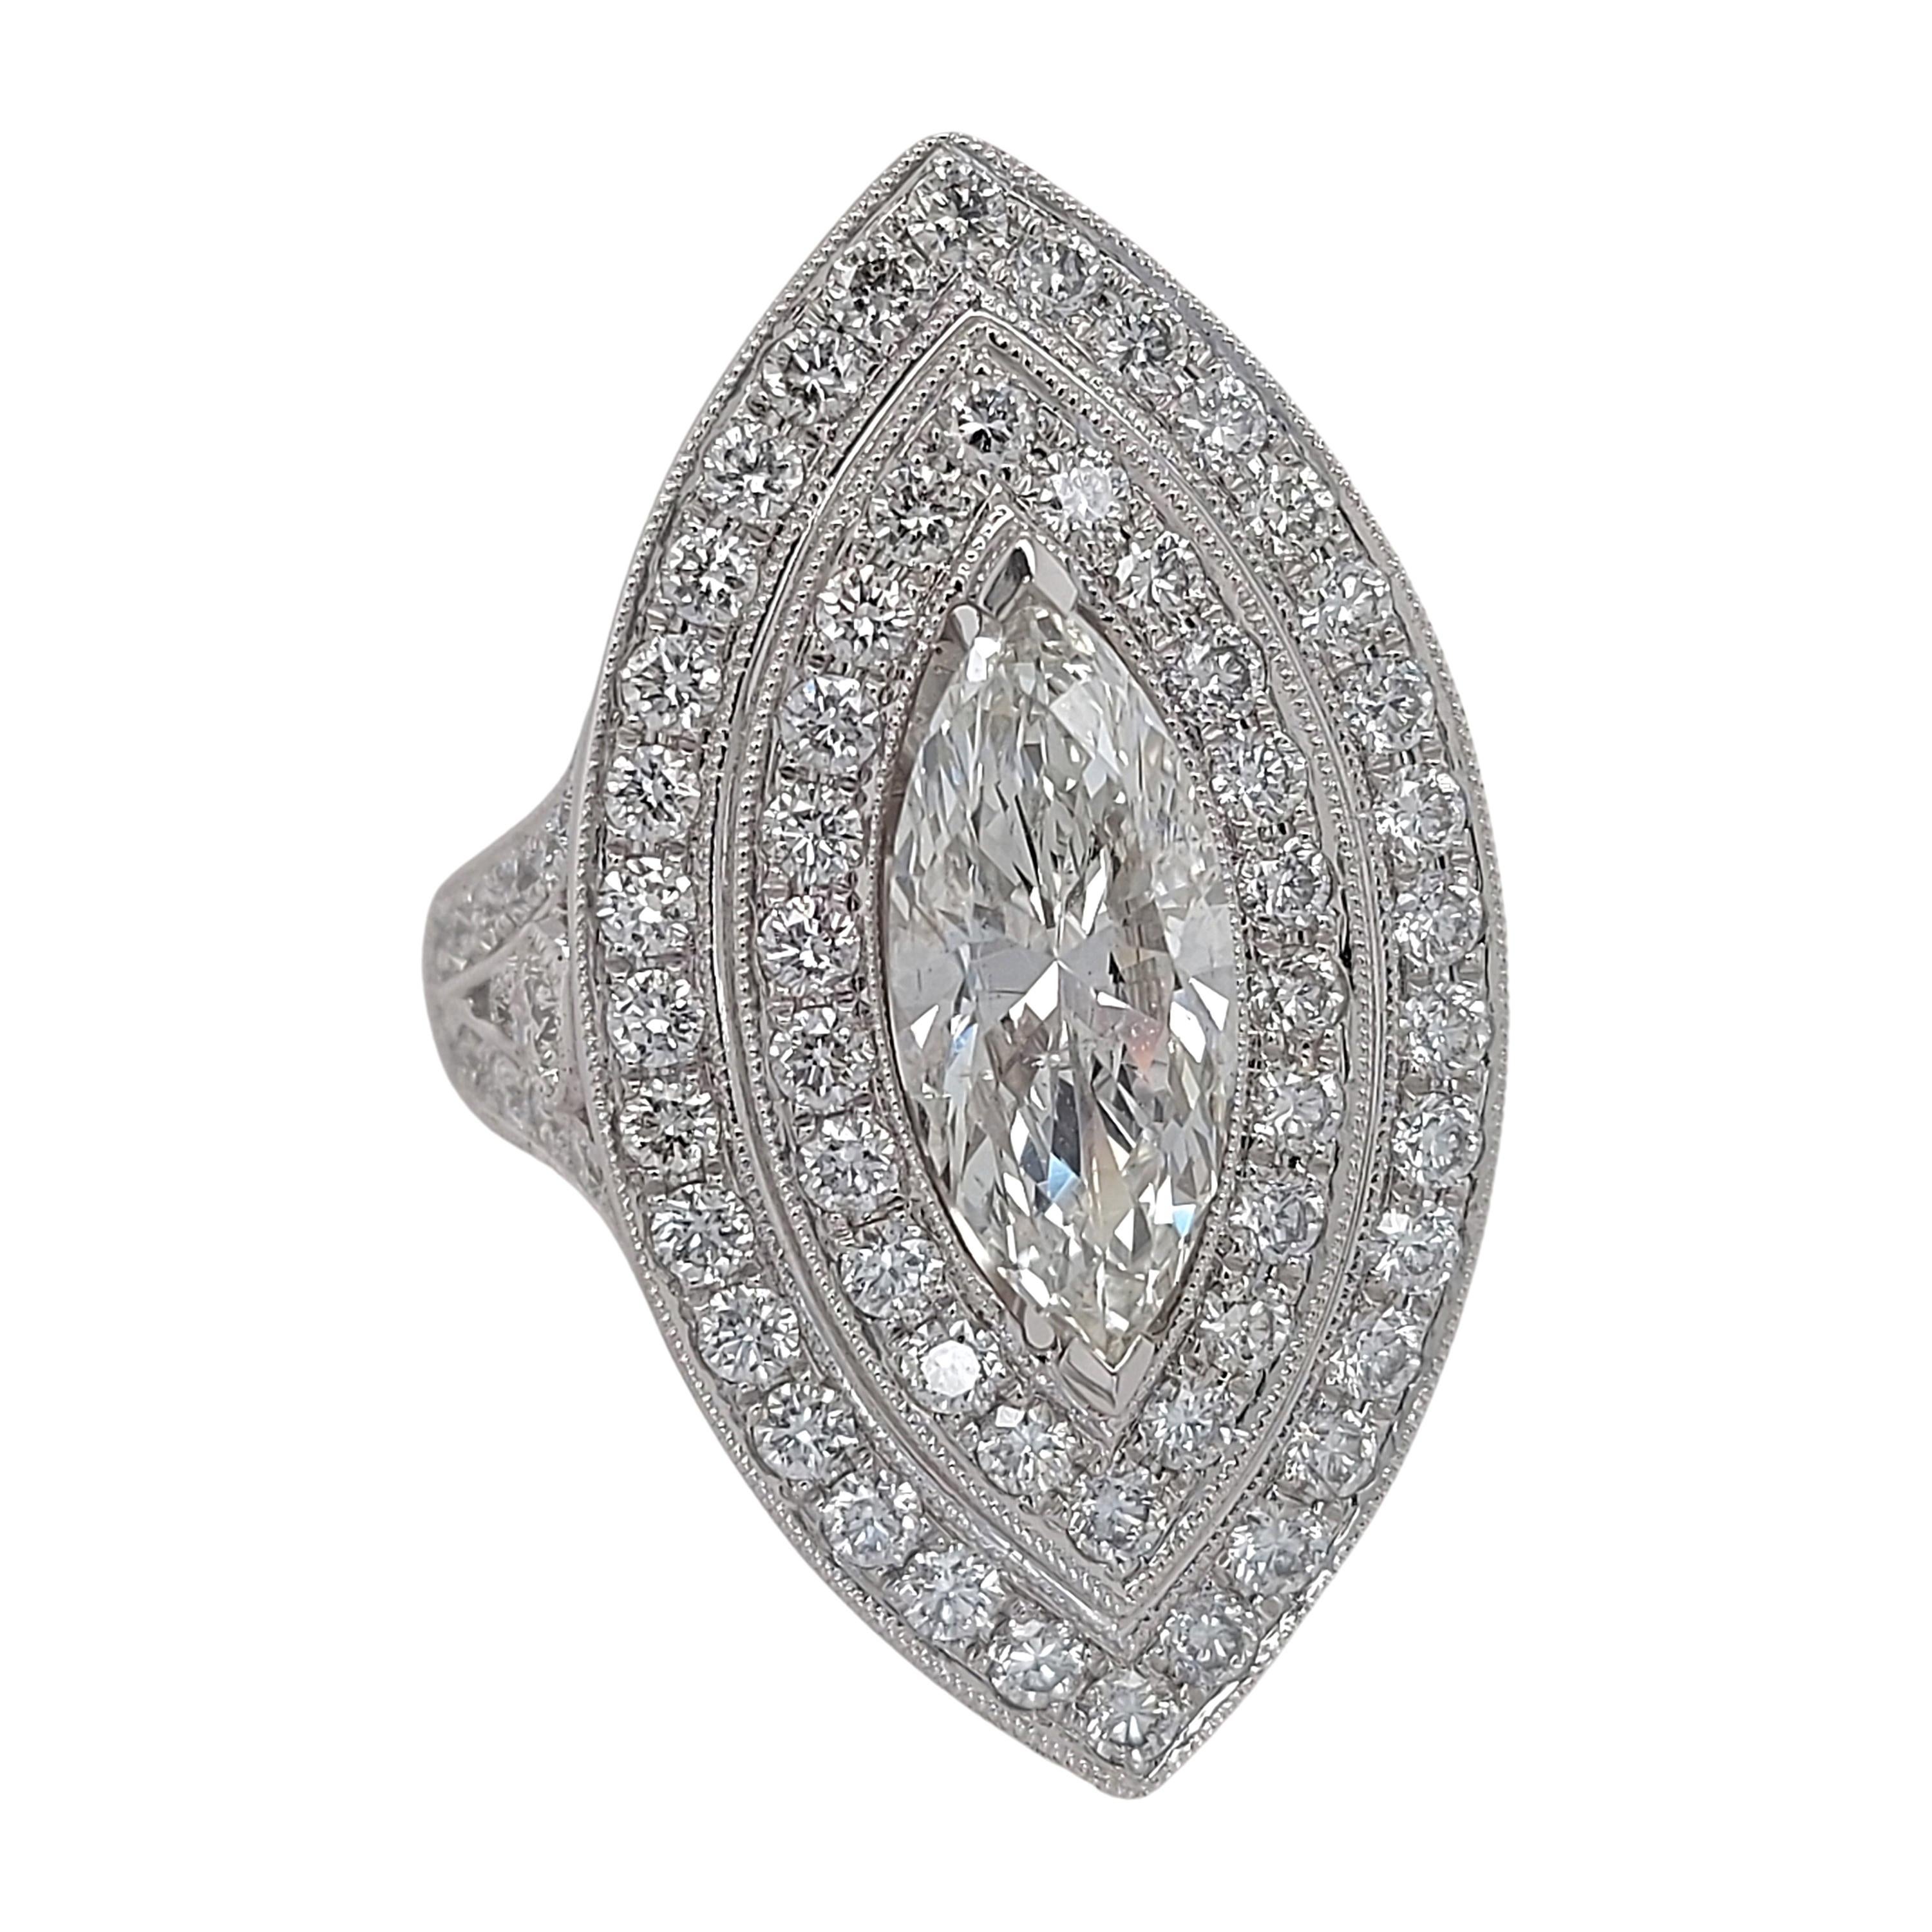 18kt White Gold Ring With Large 1.78 Carat Marquise Diamond & Brilliant Diamonds